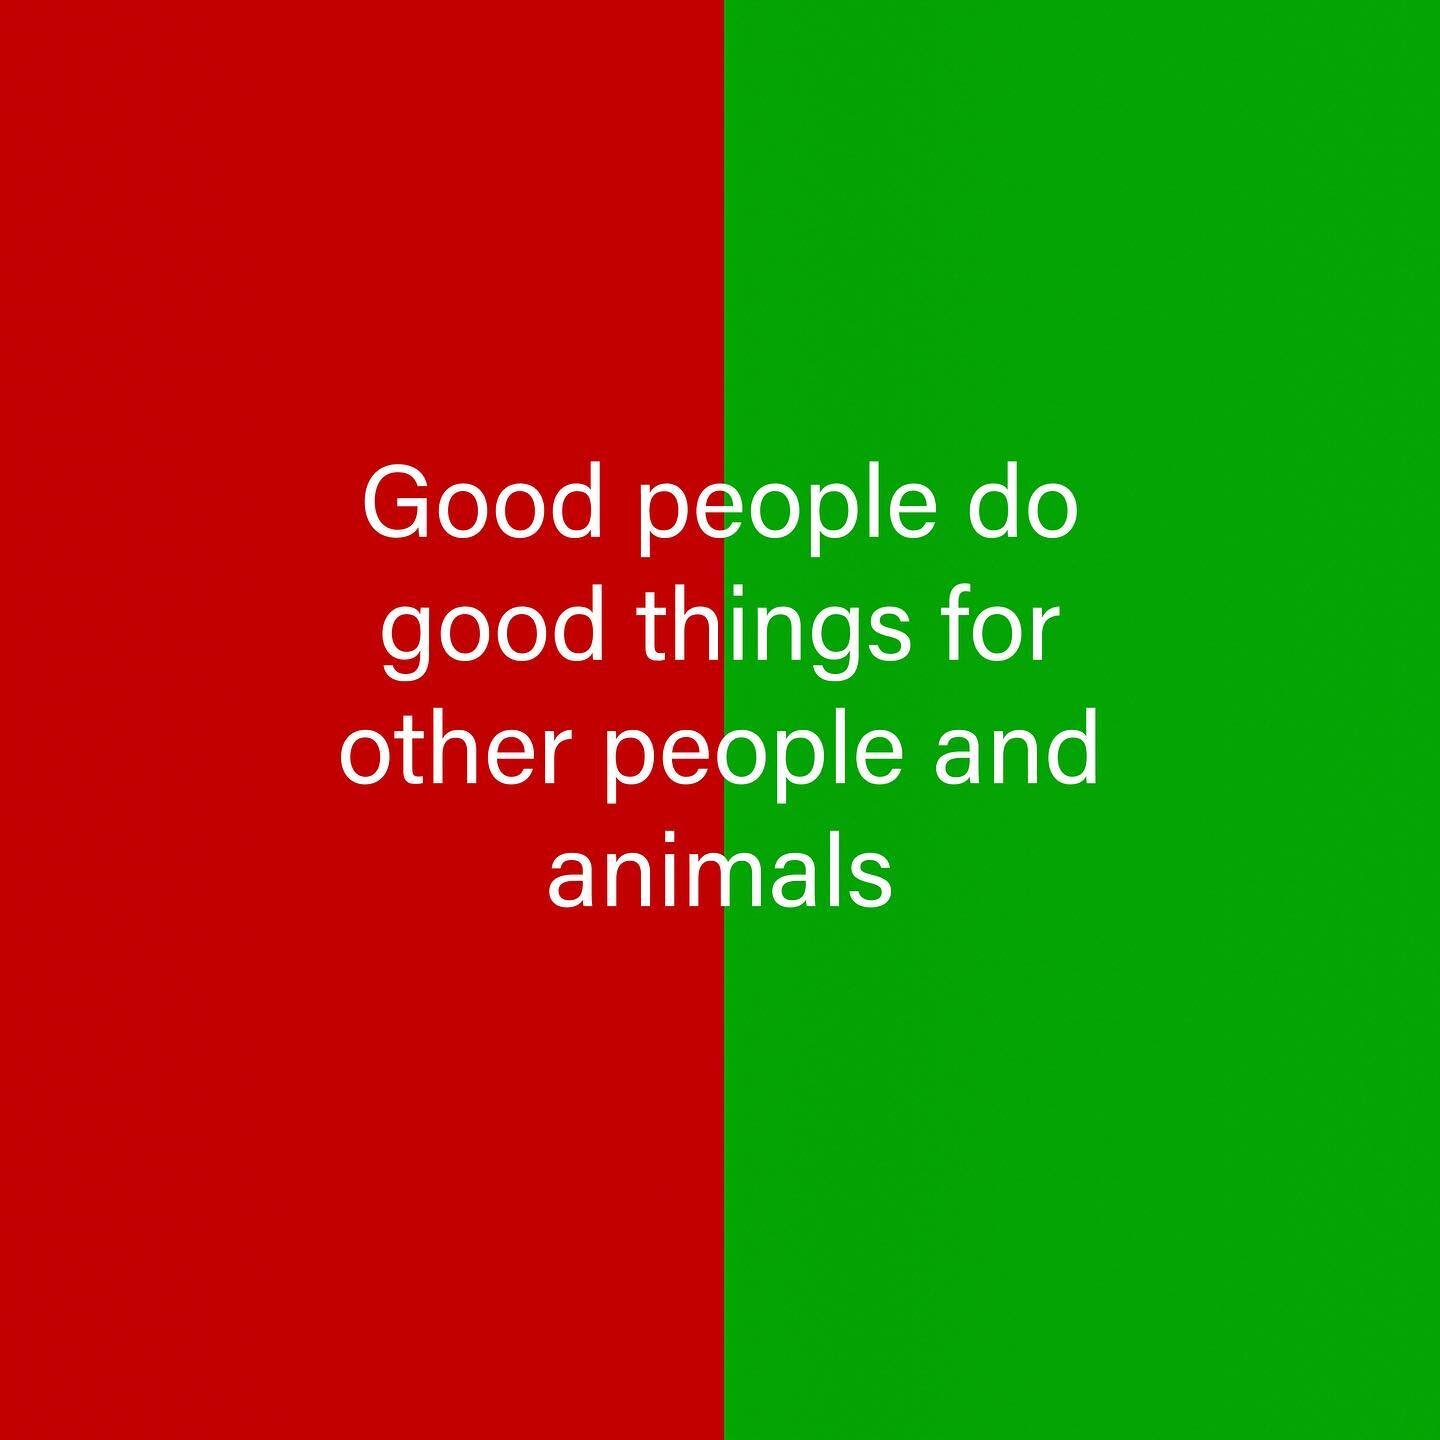 Good people do good things for other people and animals
❤️💚